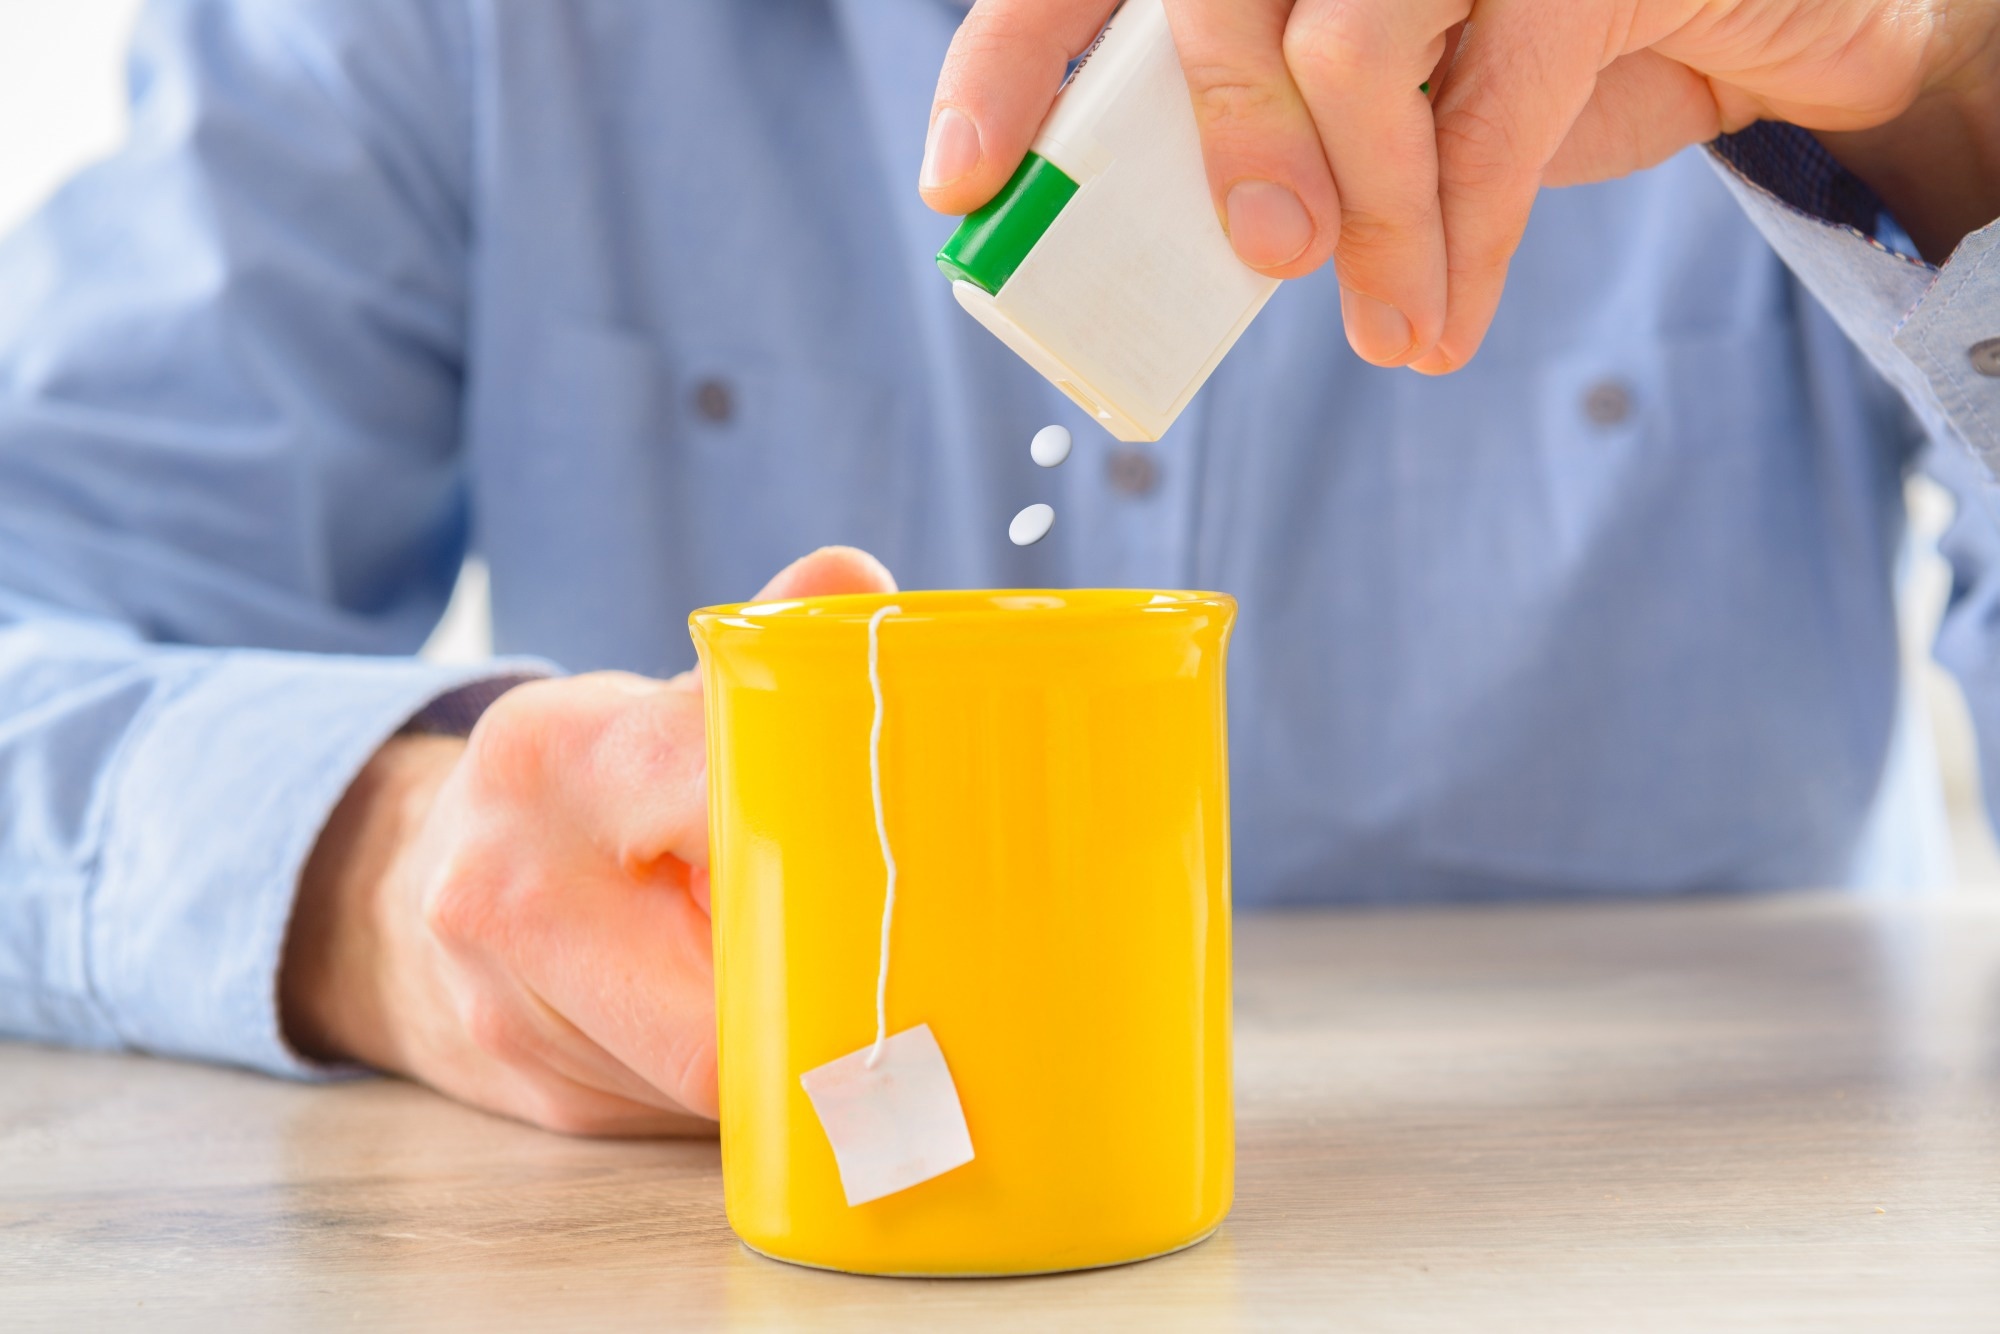 Study: Artificial sweeteners and risk of cardiovascular diseases: results from the prospective NutriNet-Santé cohort. Image Credit: Monika Wisniewska / Shutterstock